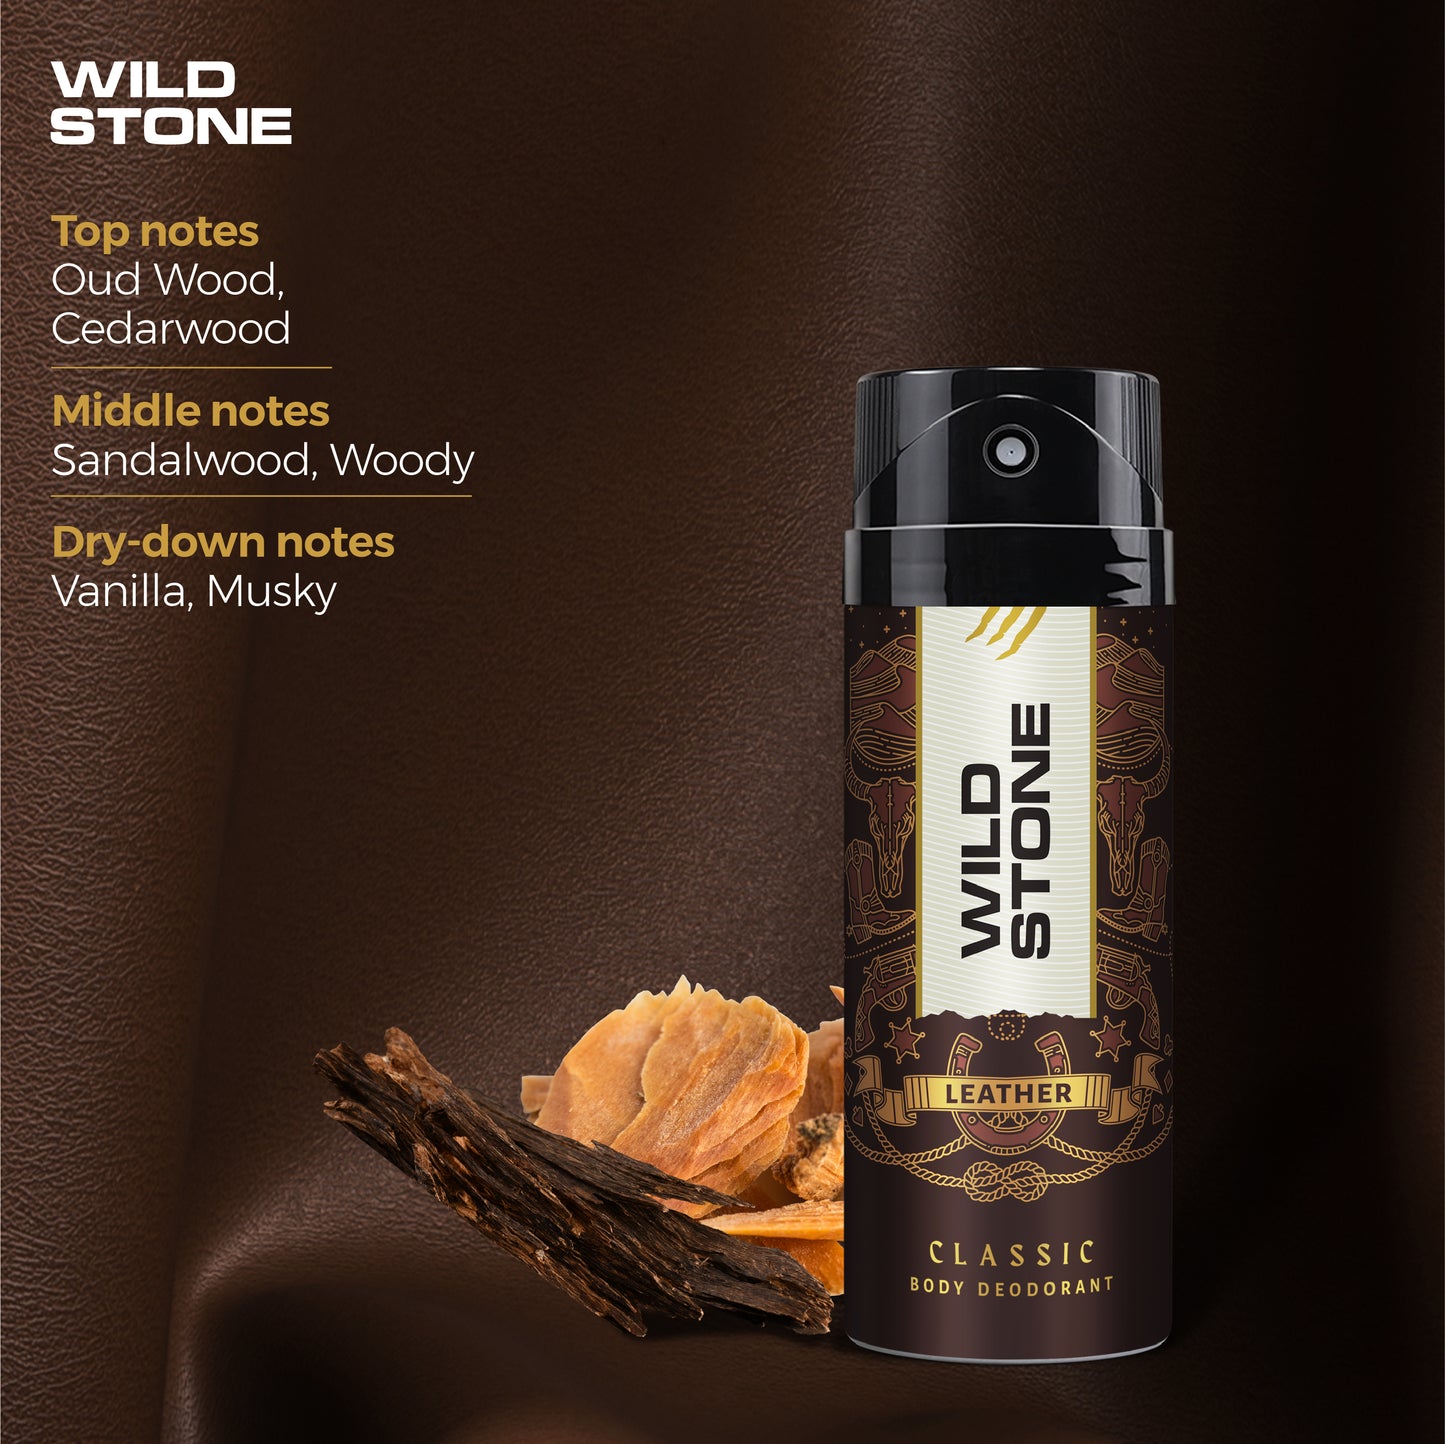 Wild Stone Classic Leather Deodorant, Pack of 2 (225ml each)